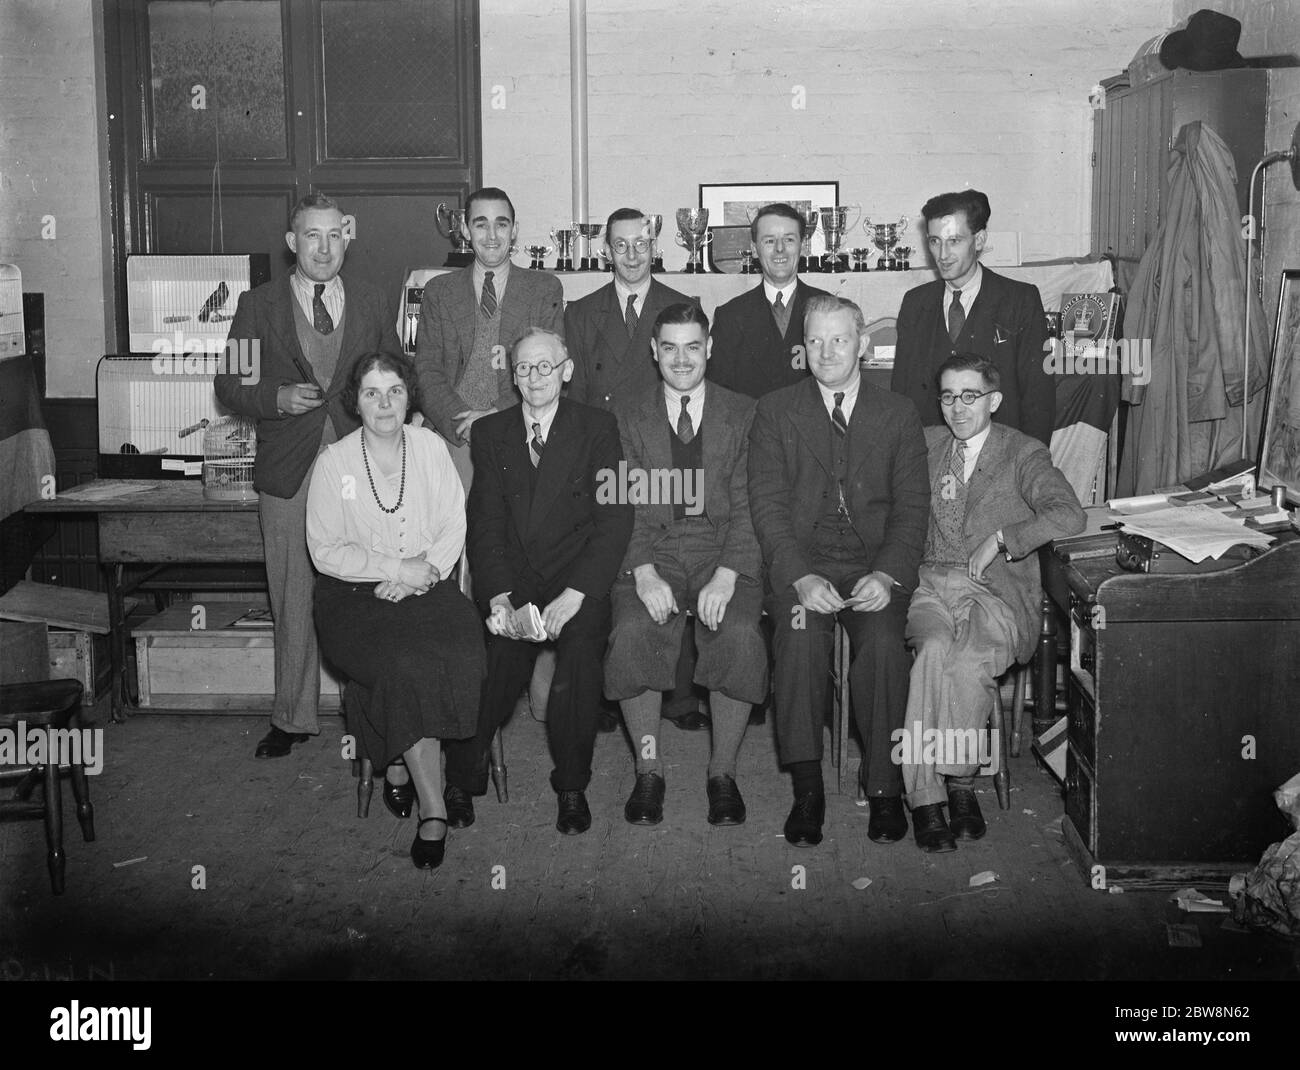 Sidcup Cage Bird Association Show . Club officials , front row , left to right ; Mrs Thornton , Mr A Goodwin ( Judge ) , Mr F C Jones ( Chairman ) , Mr Ephgrave ( Judge ) Mr Kirby Smith ( Secretary ) Standing , left to right ; Mr B Proudfoot , Mr E Watkins , Mr S Rice , Mr S Cayless , Mr J Slade . 1937 Stock Photo